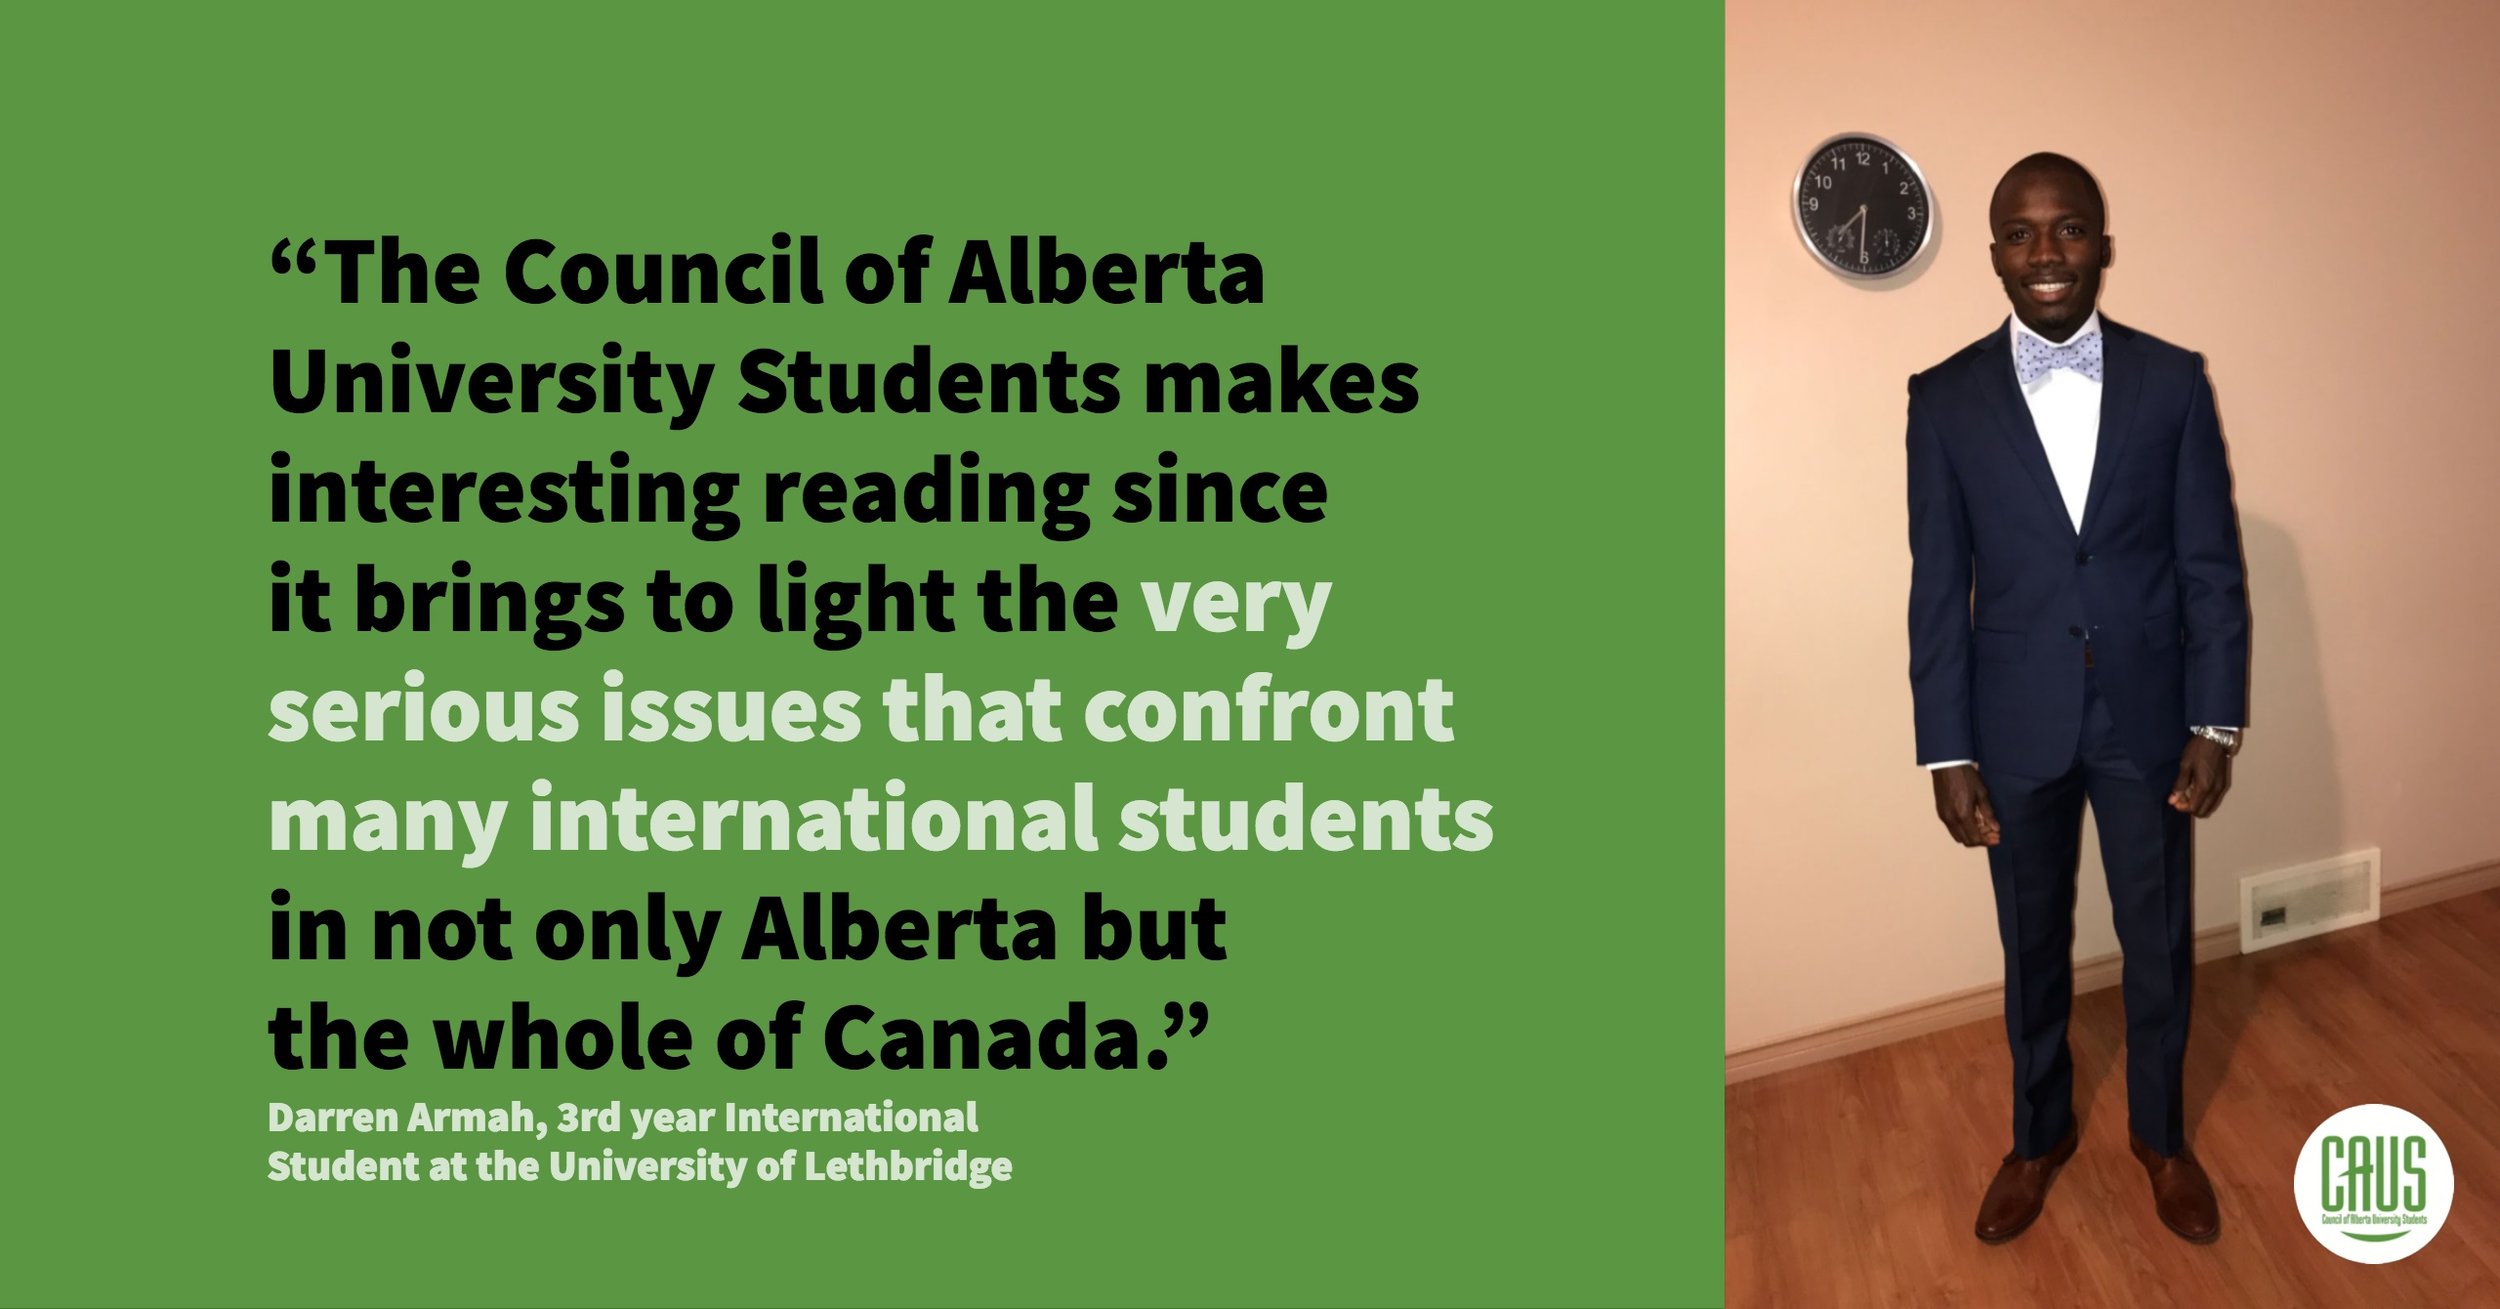  “The contribution of international students to the demography of Alberta has been shown in the report to be positive. The contributions to the province’s economy are also good. It would be wrong to ignore these positive developments. In the long run